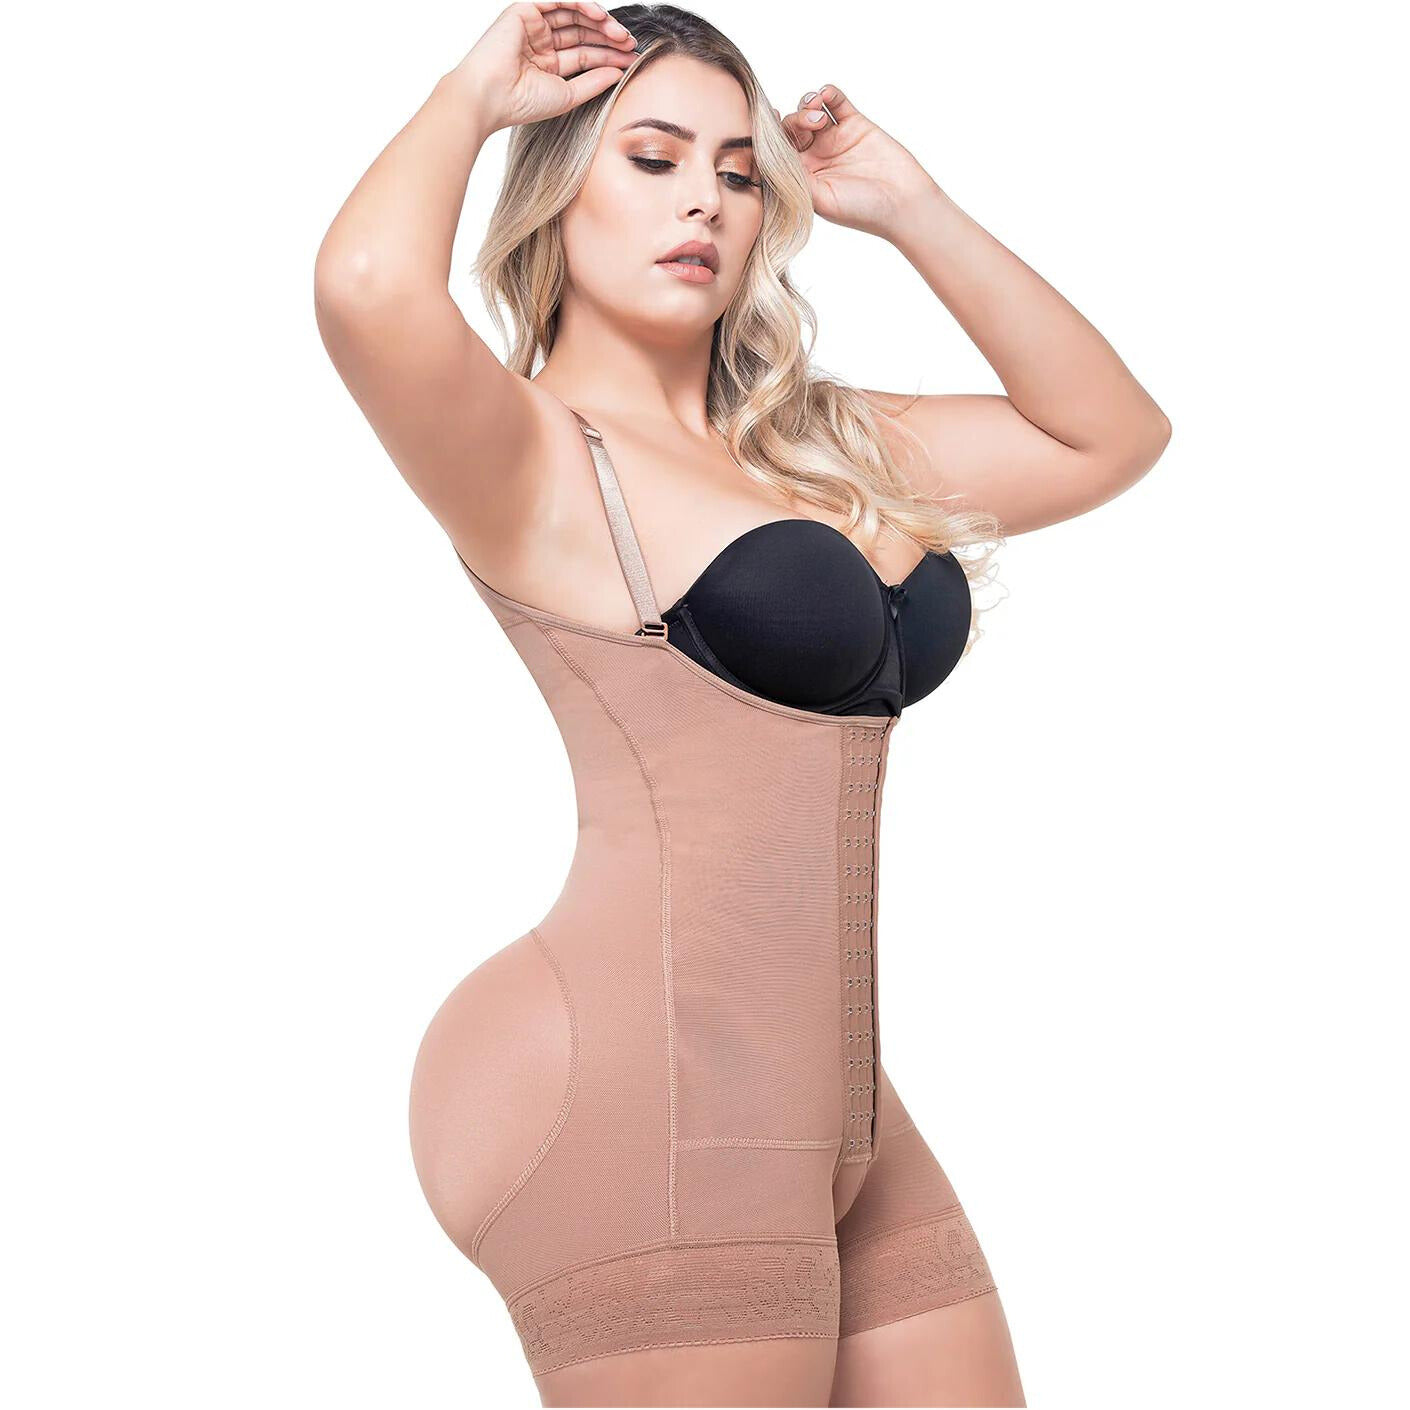 13 Features to Look for to Find the Best Postpartum Shapewear